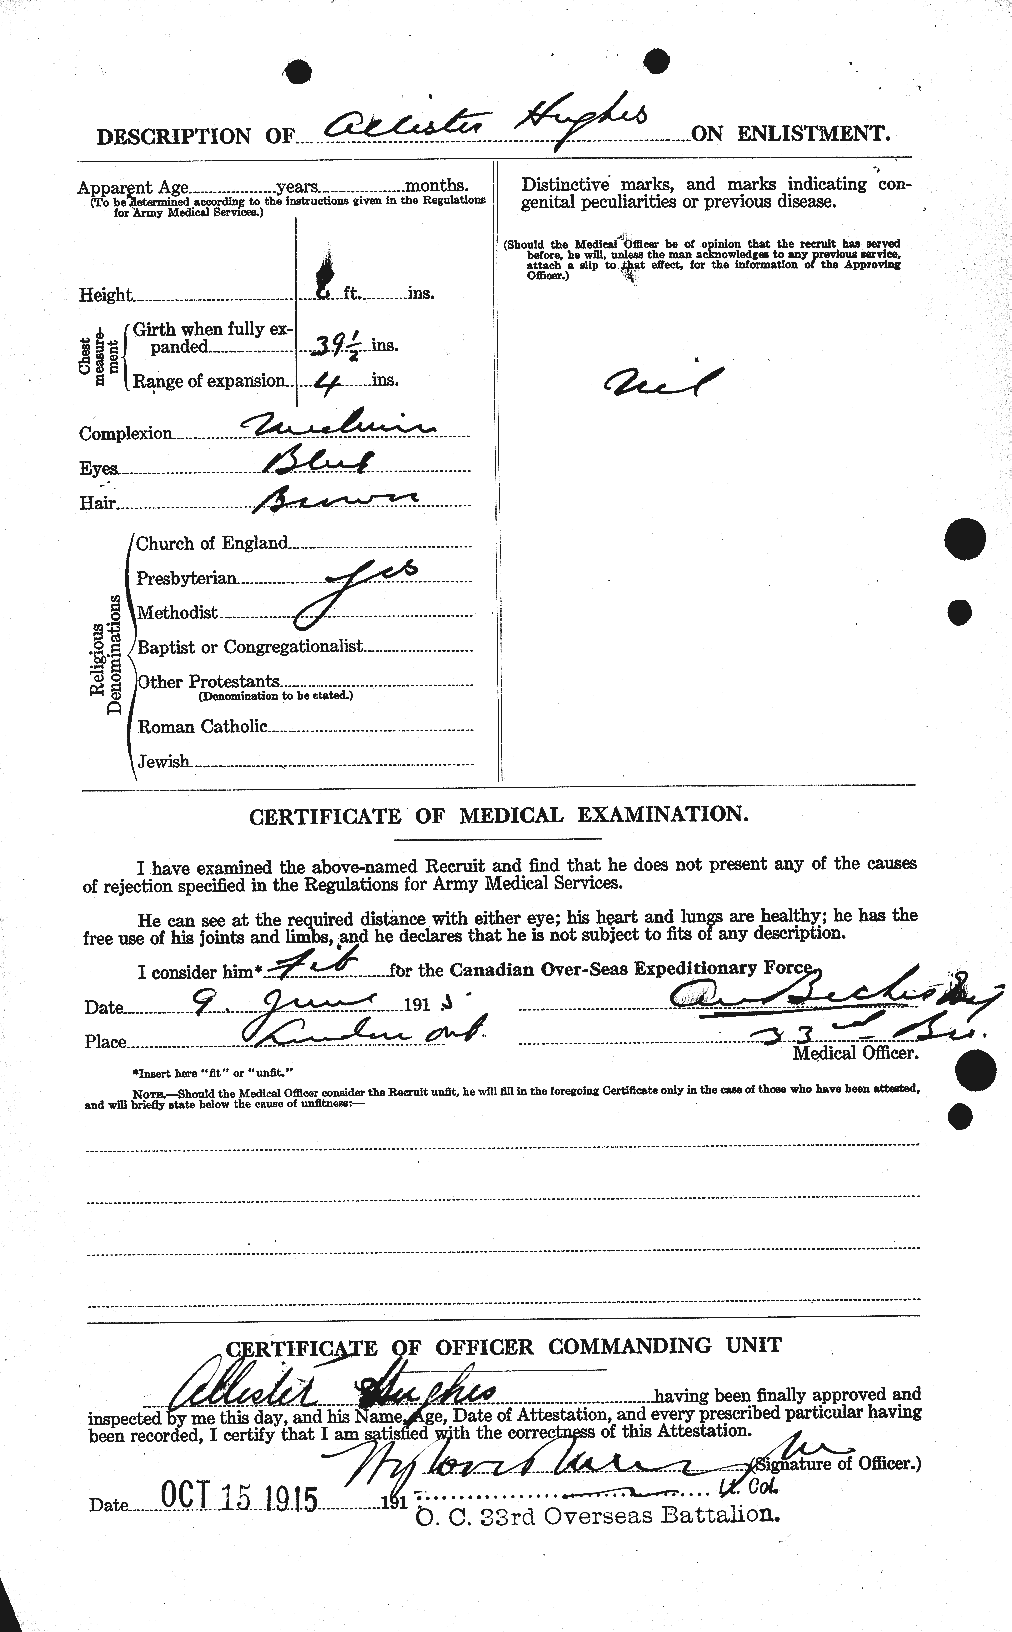 Personnel Records of the First World War - CEF 402547b